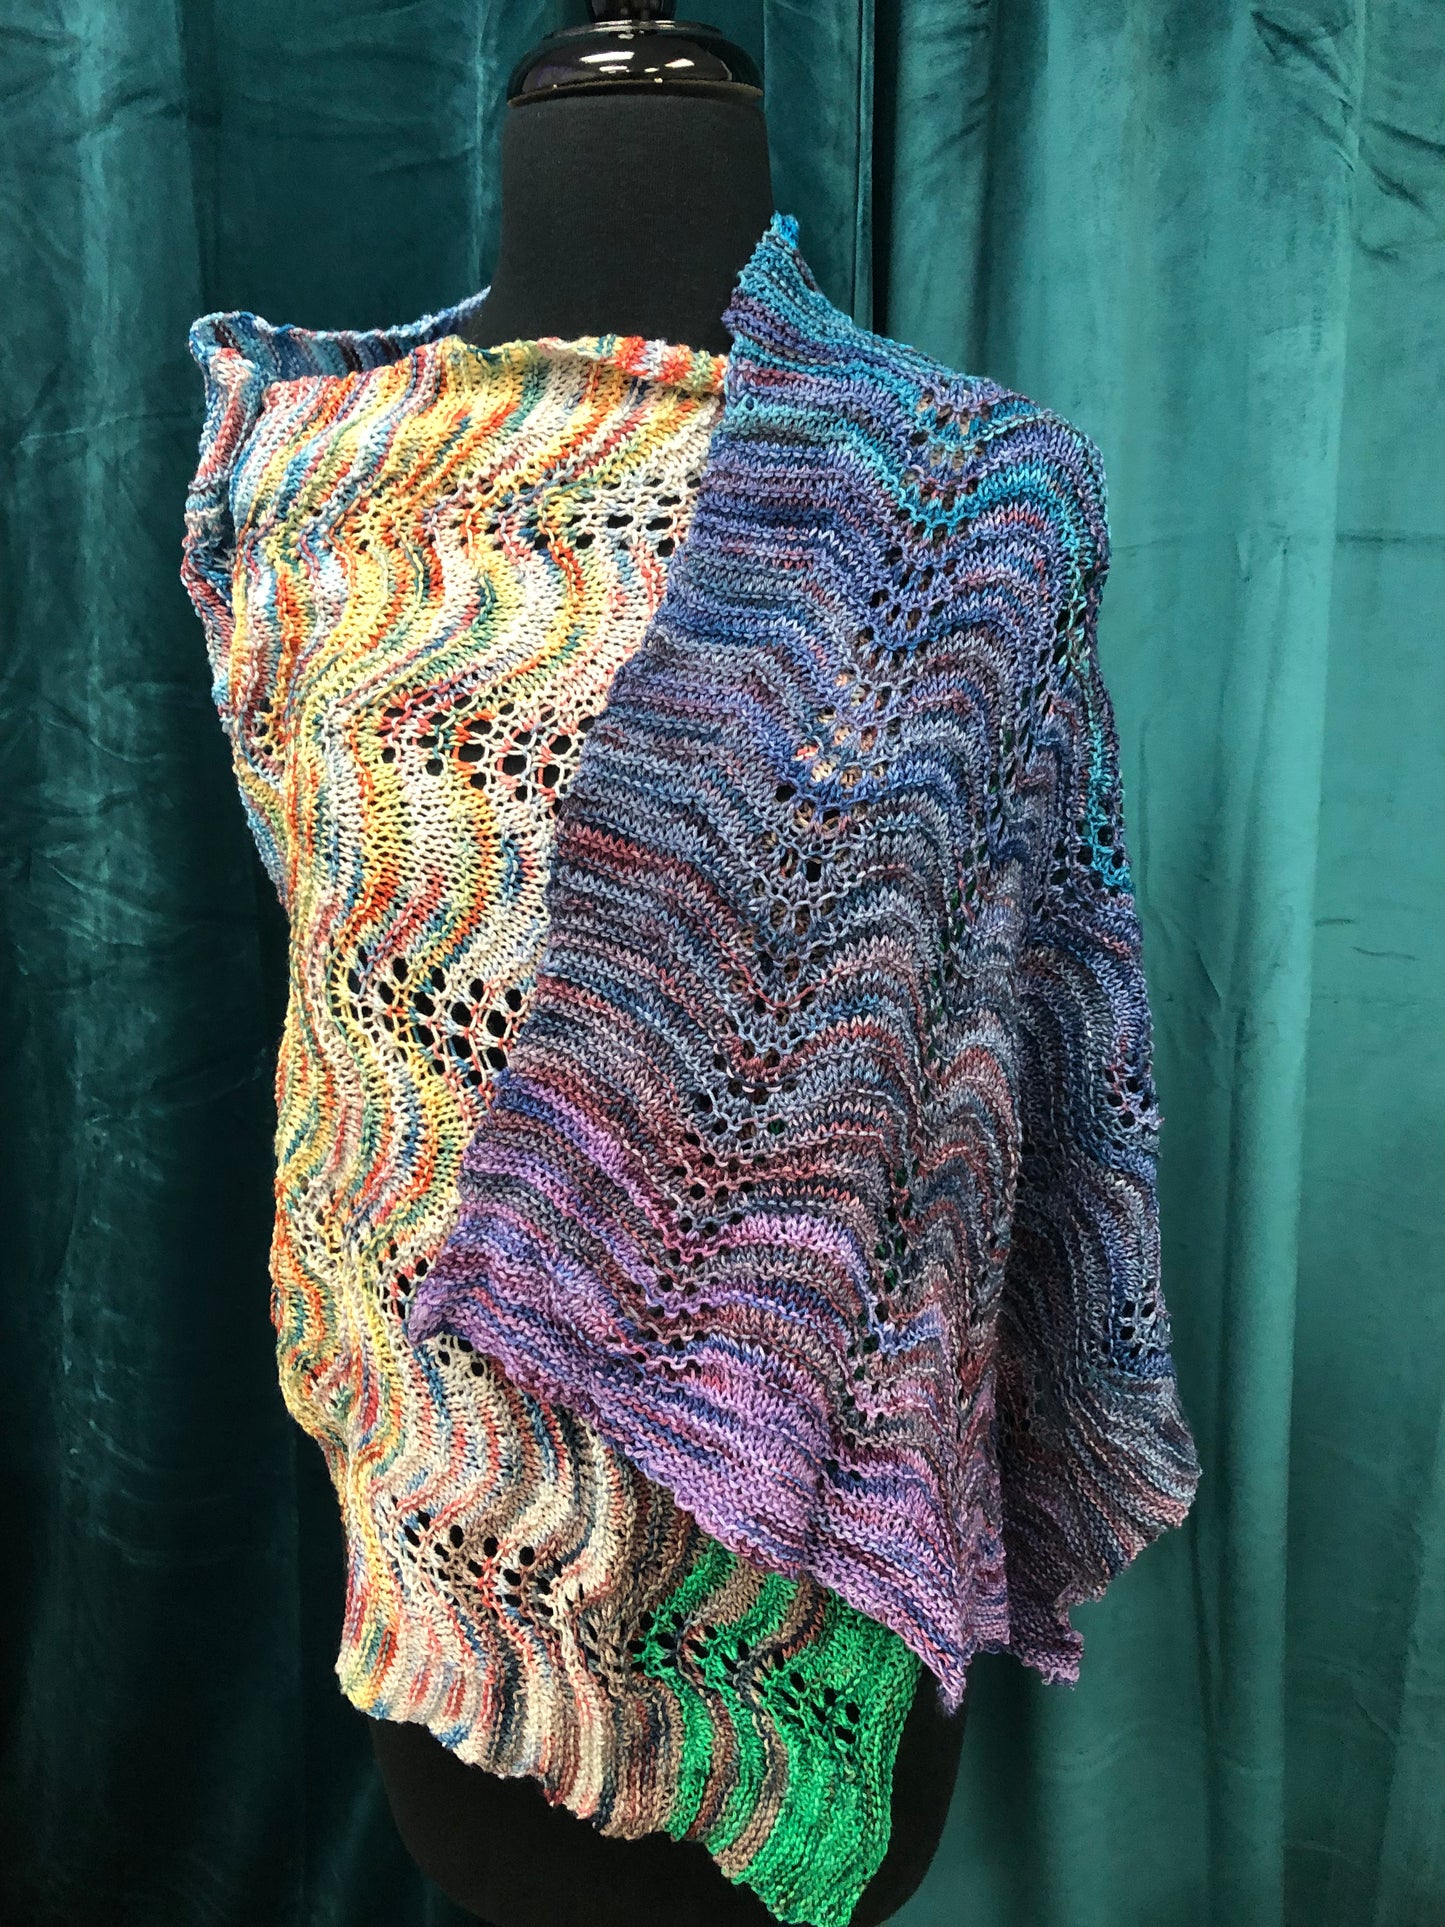 From the Deep Wrap Kit